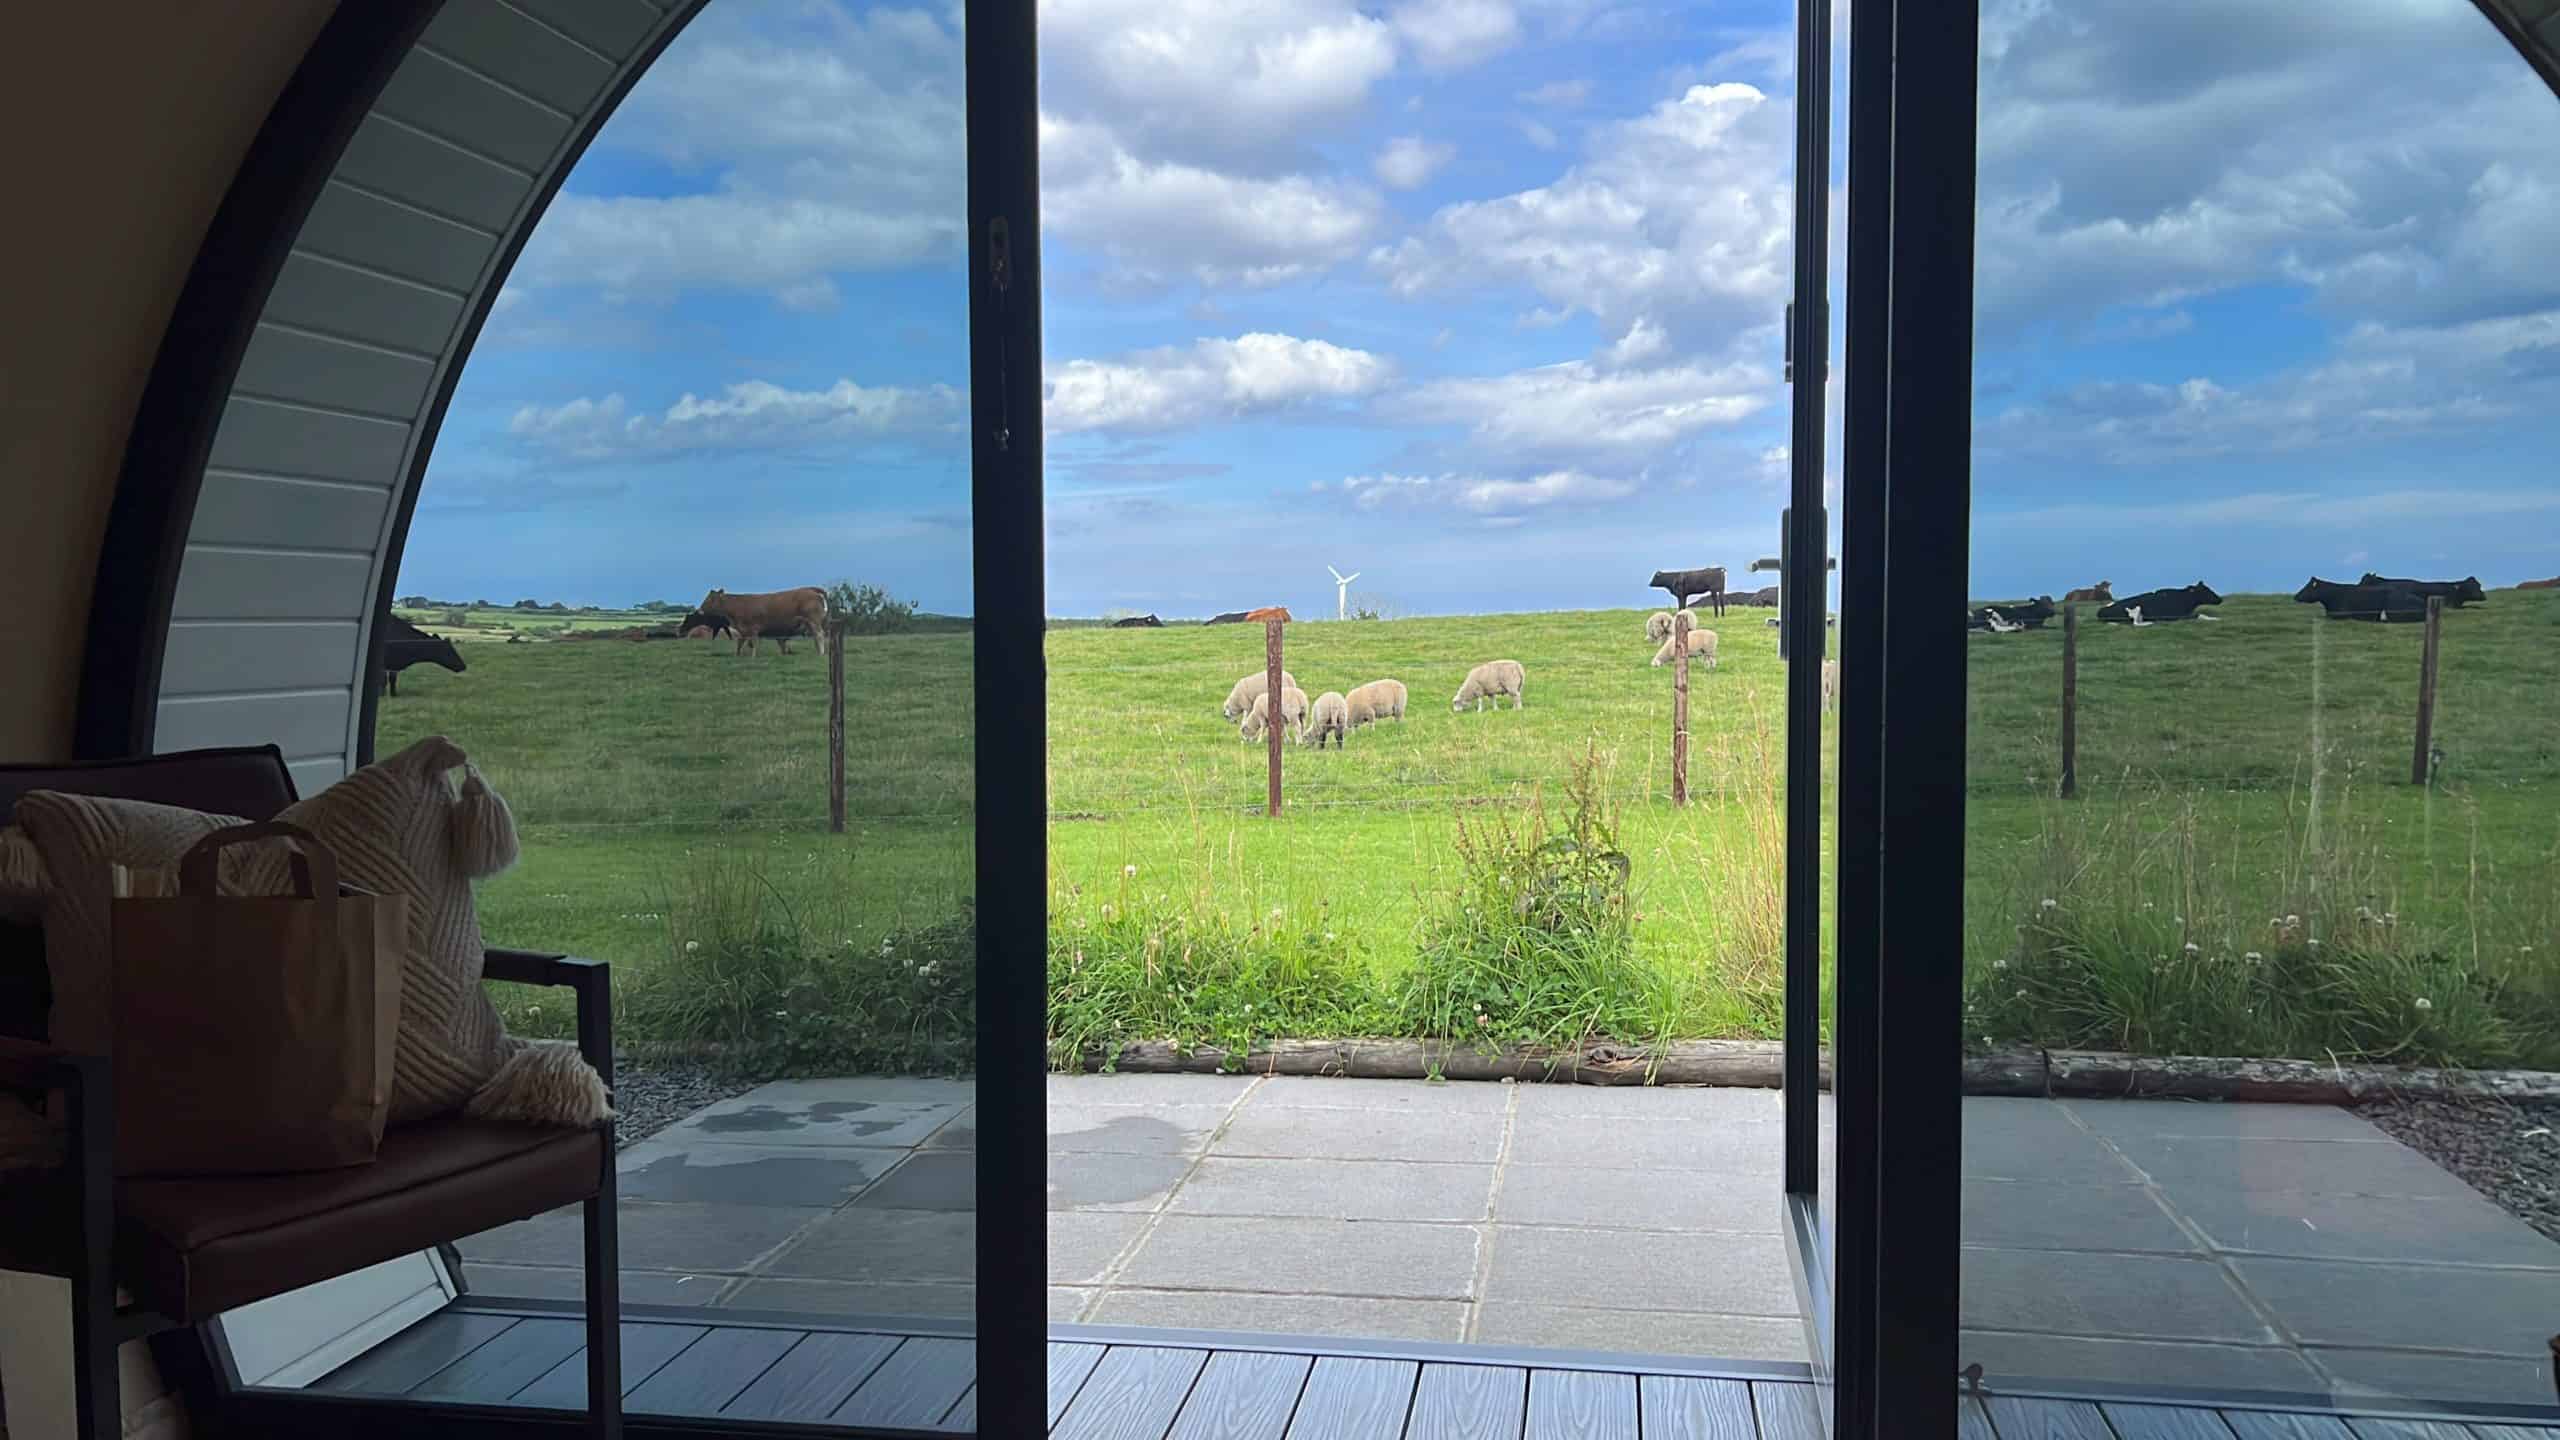 “Absolutely loved our stay at Black Knowe!”